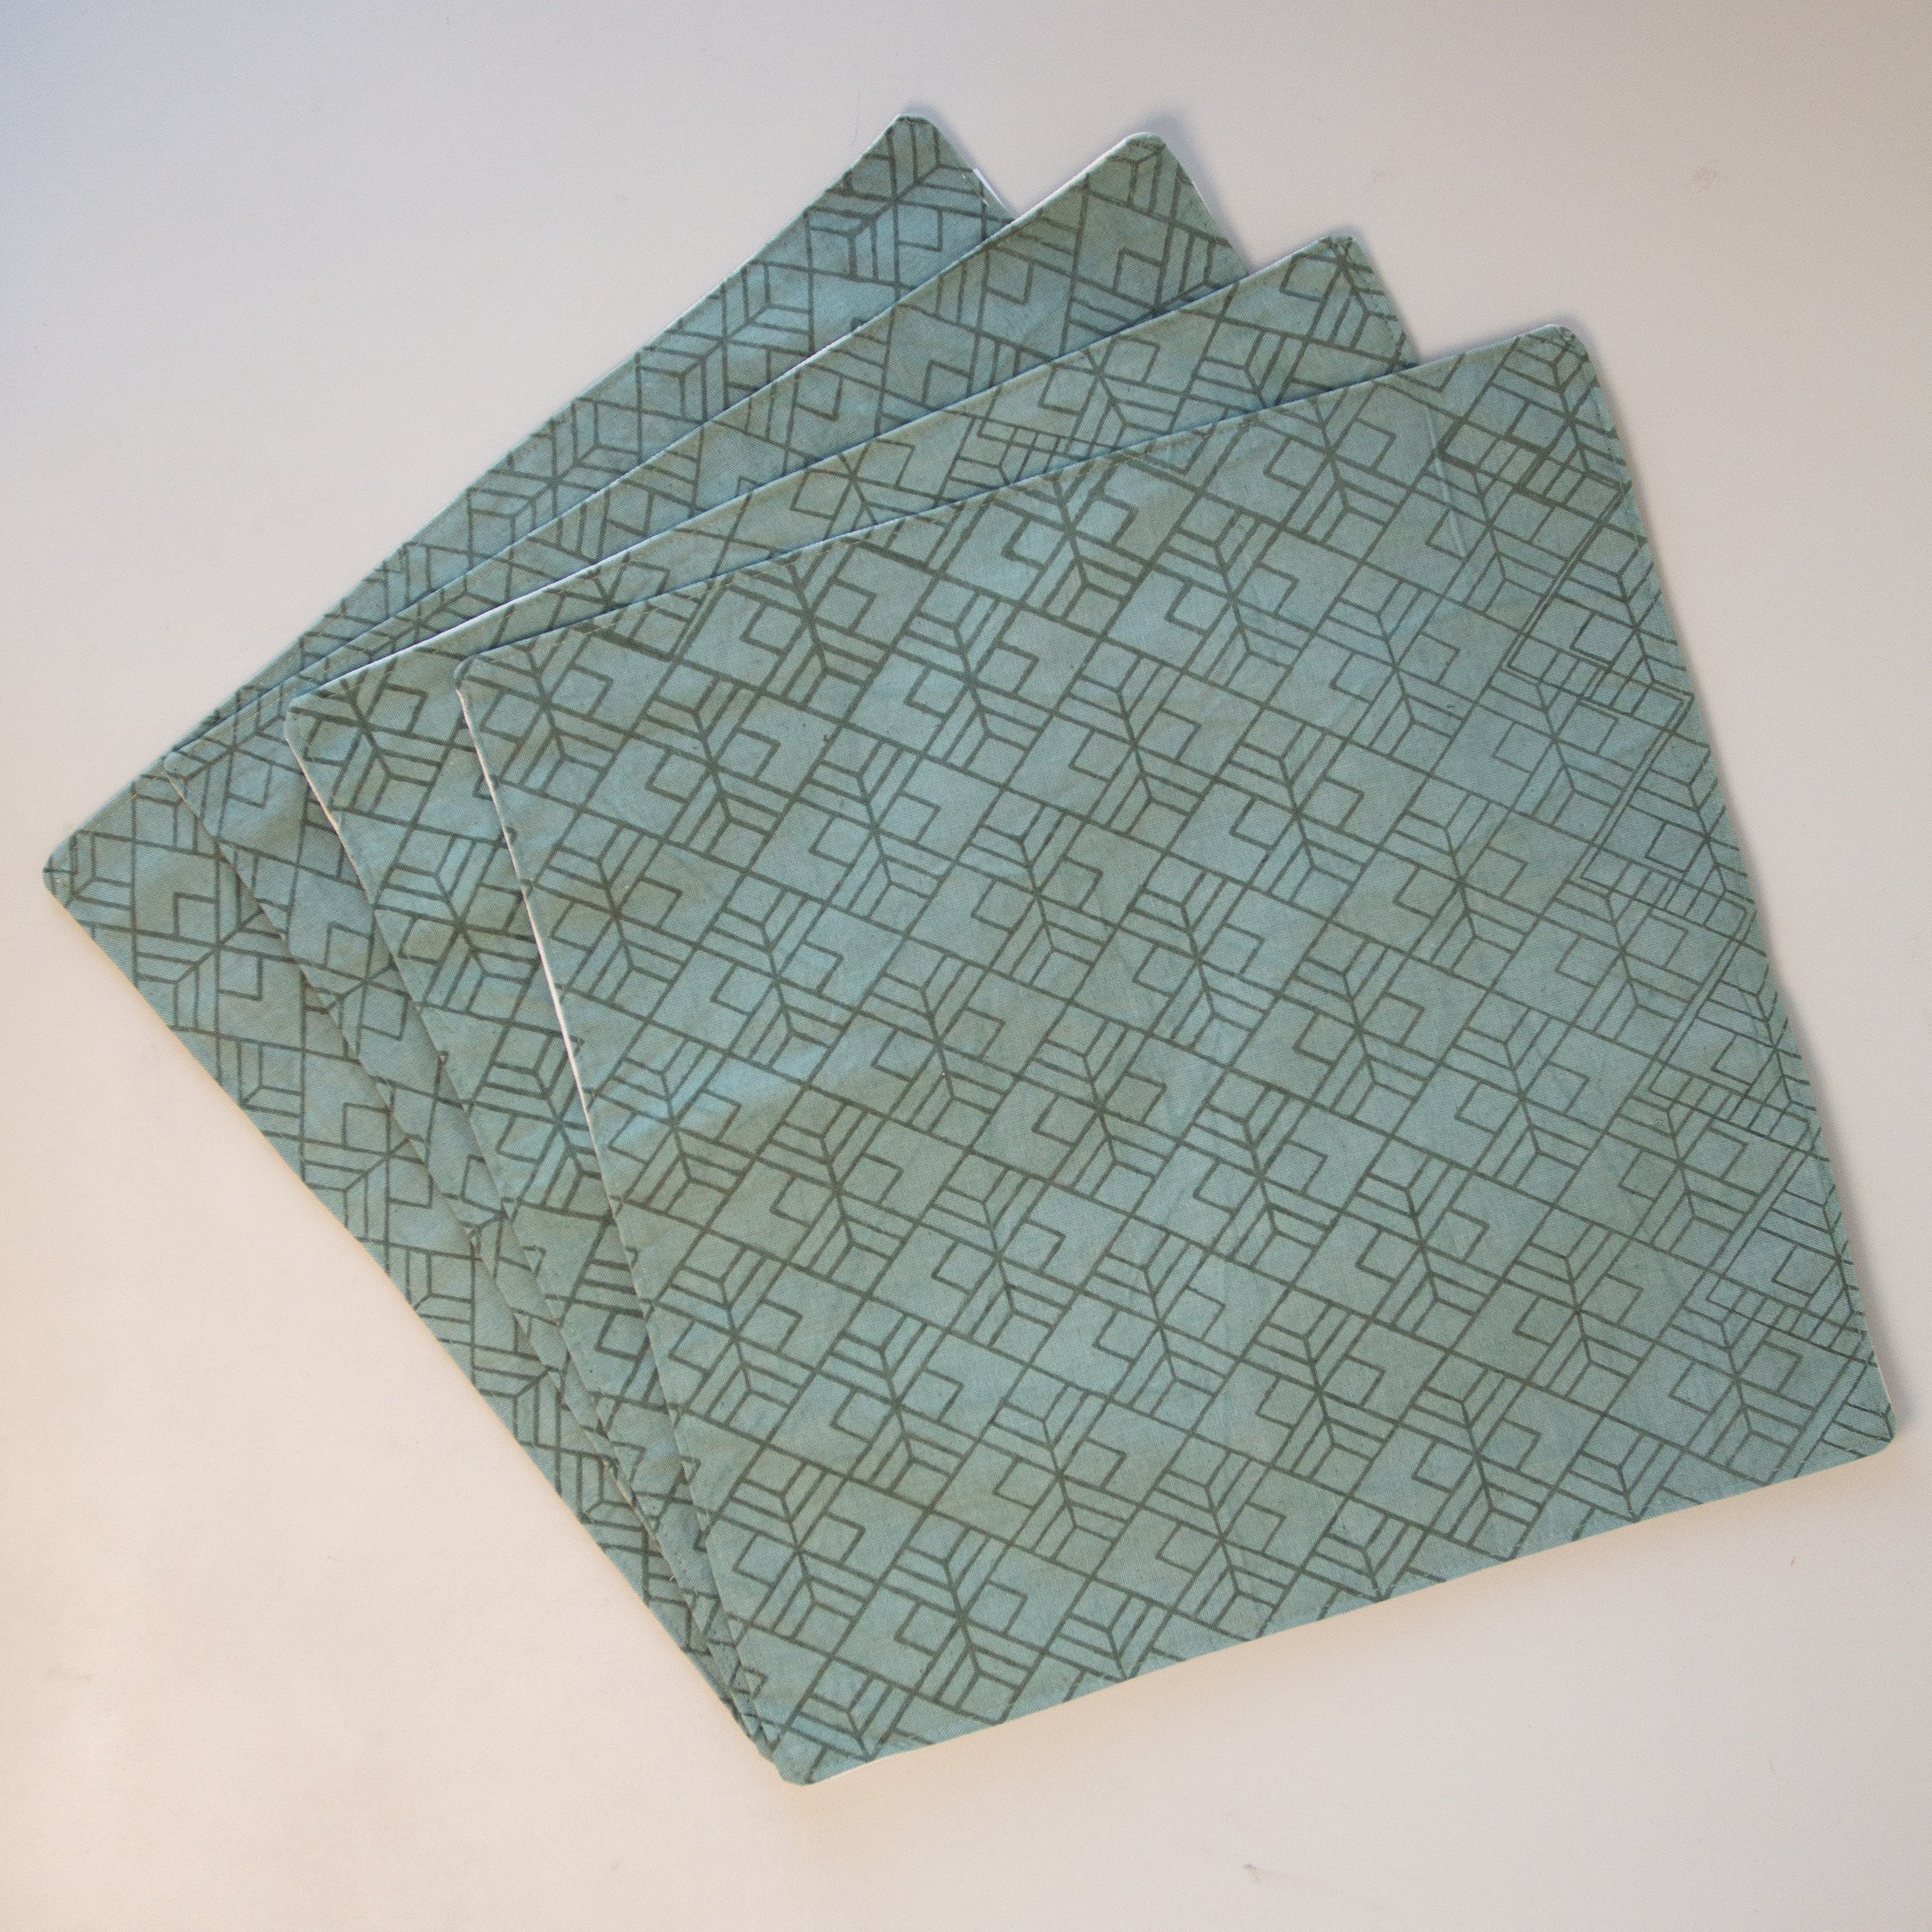 Turkish Diamonds Placemat Set - handmade by the women of Amani Kenya for a Fair Trade boutique